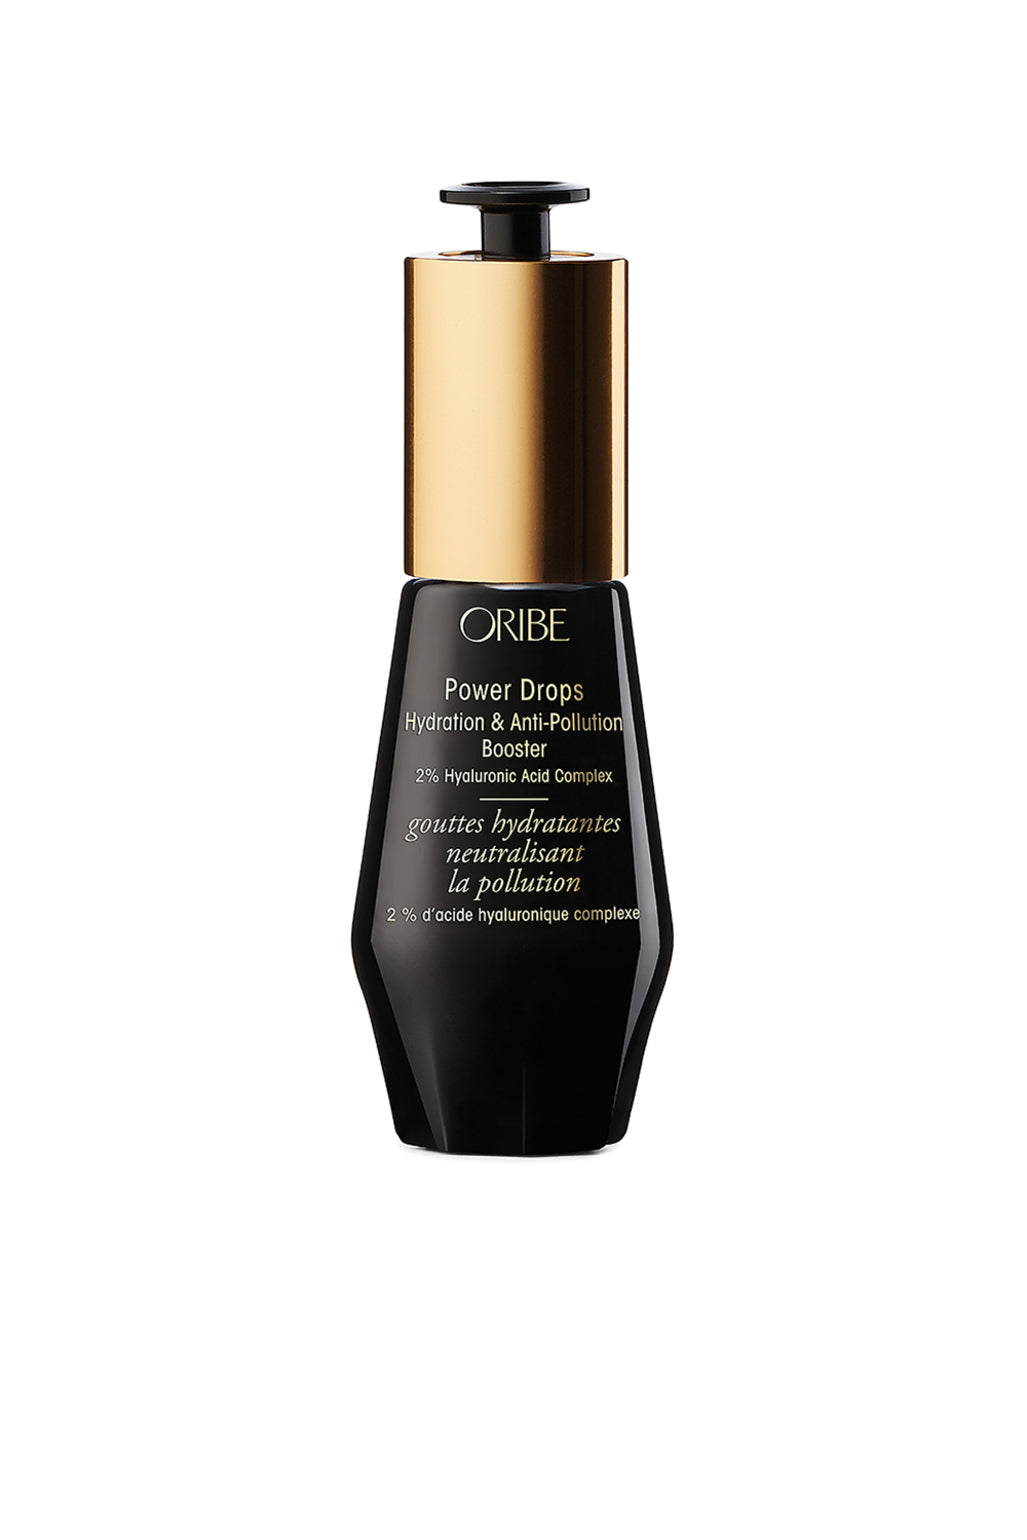 Oribe Signature Power Drops for Hydration & Anti-Pollution Booster 2% Hyaluronic Acid Complex